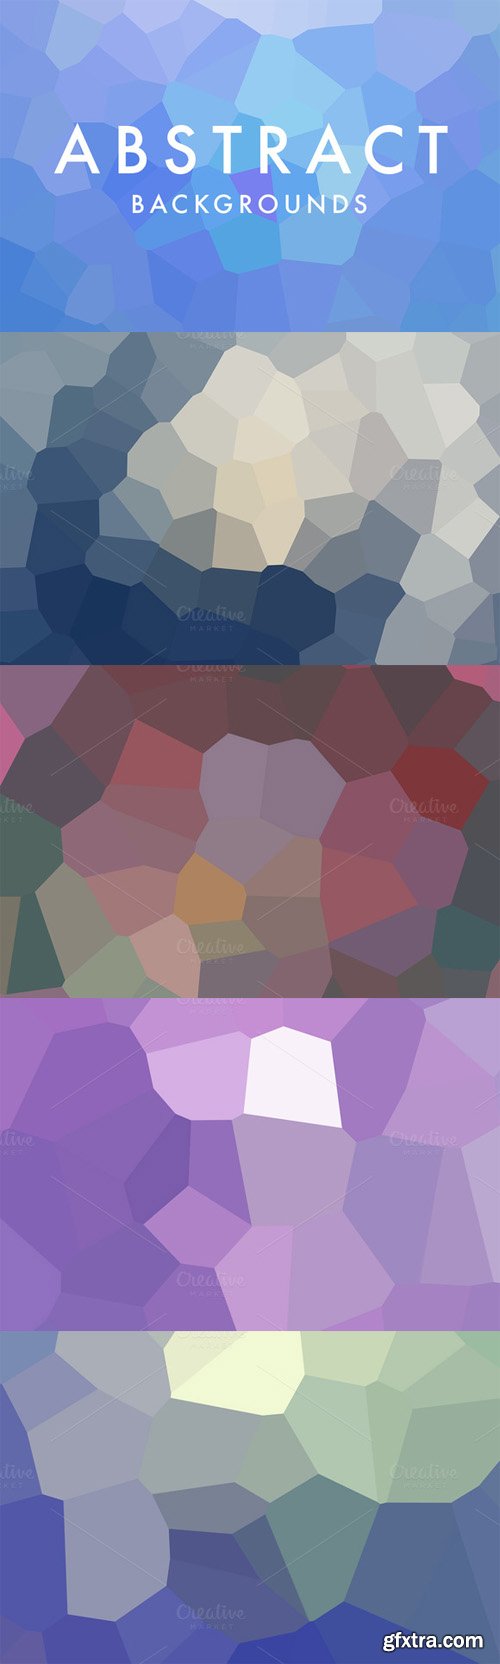 5 Abstract Backgrounds Set